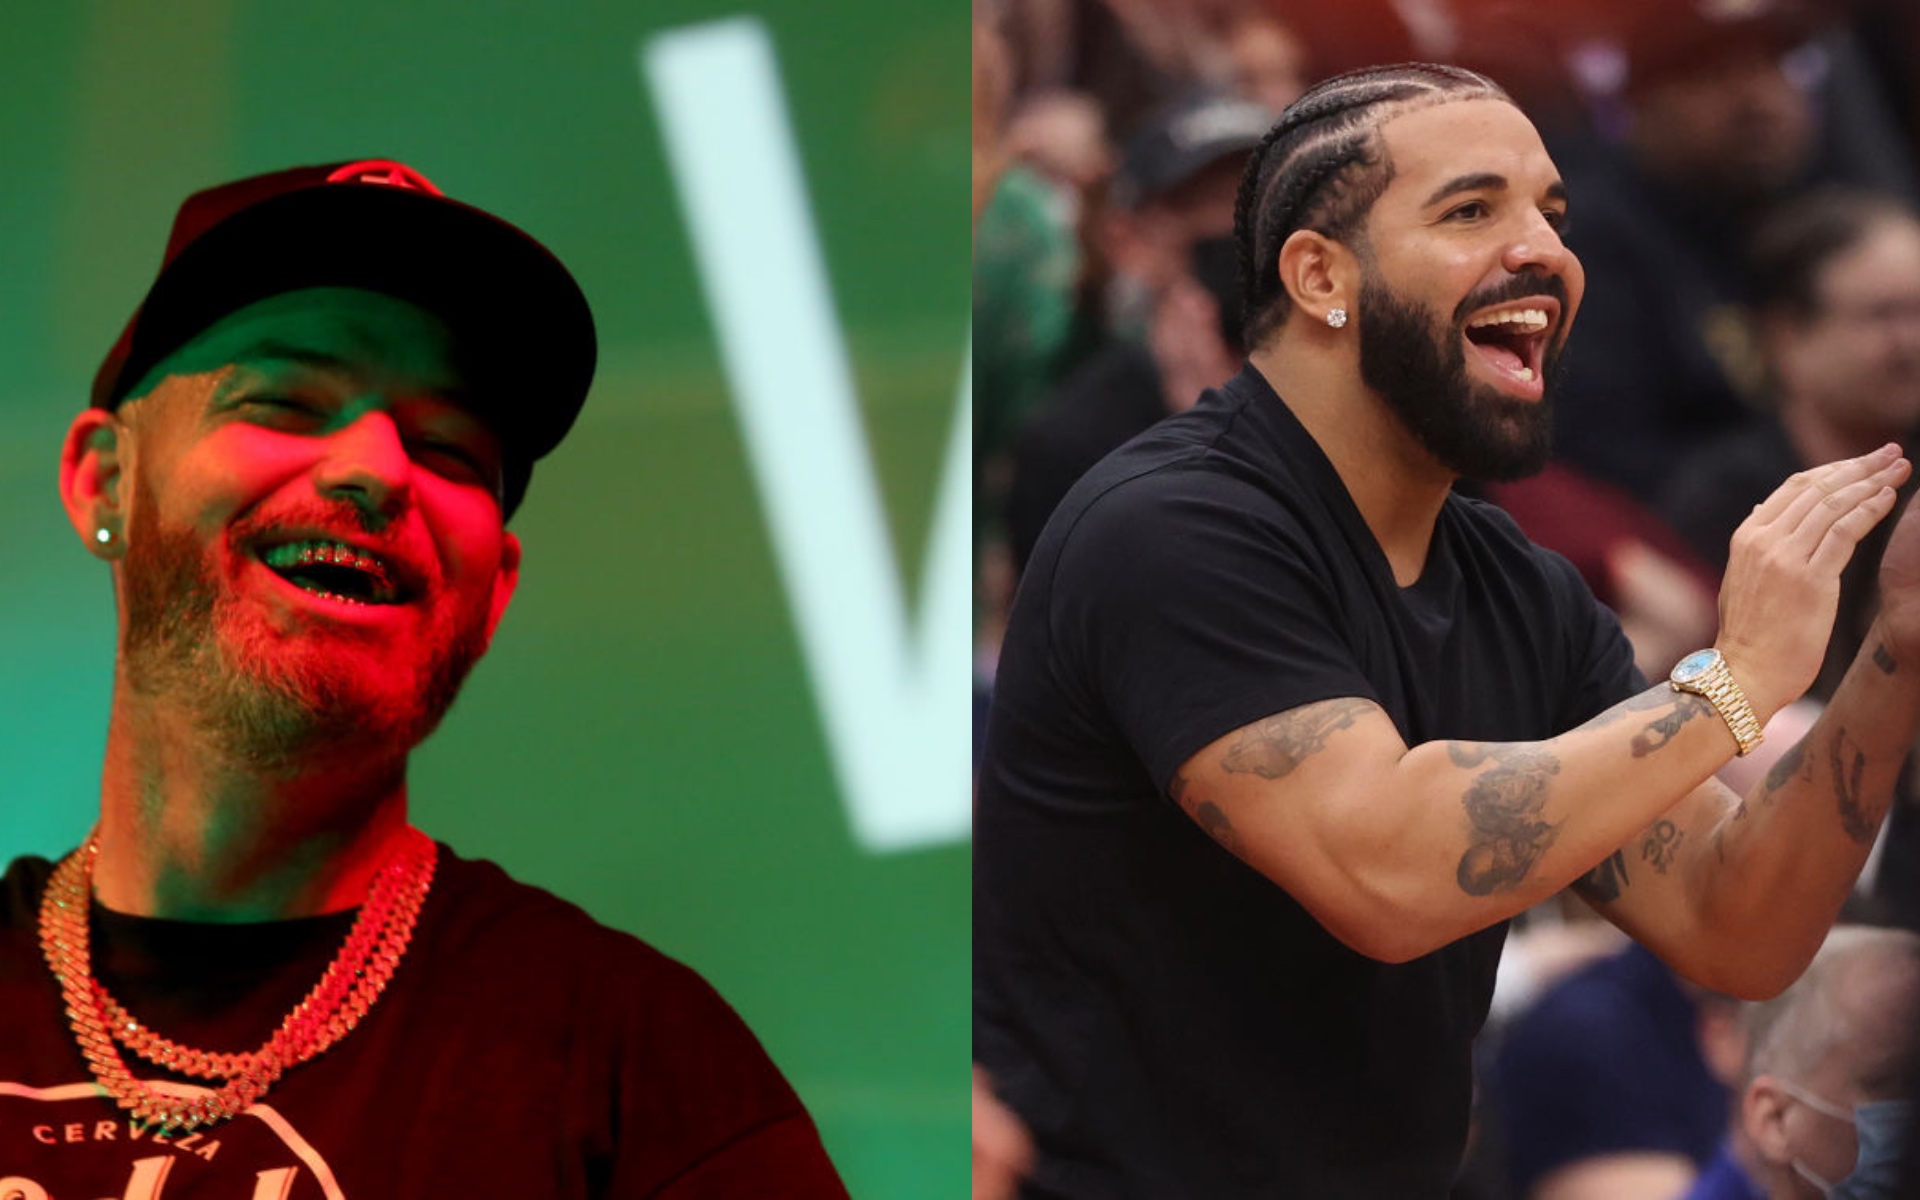 Paul Wall Says Drake Can Get A Lifetime’s Worth Of Free Grills From Him